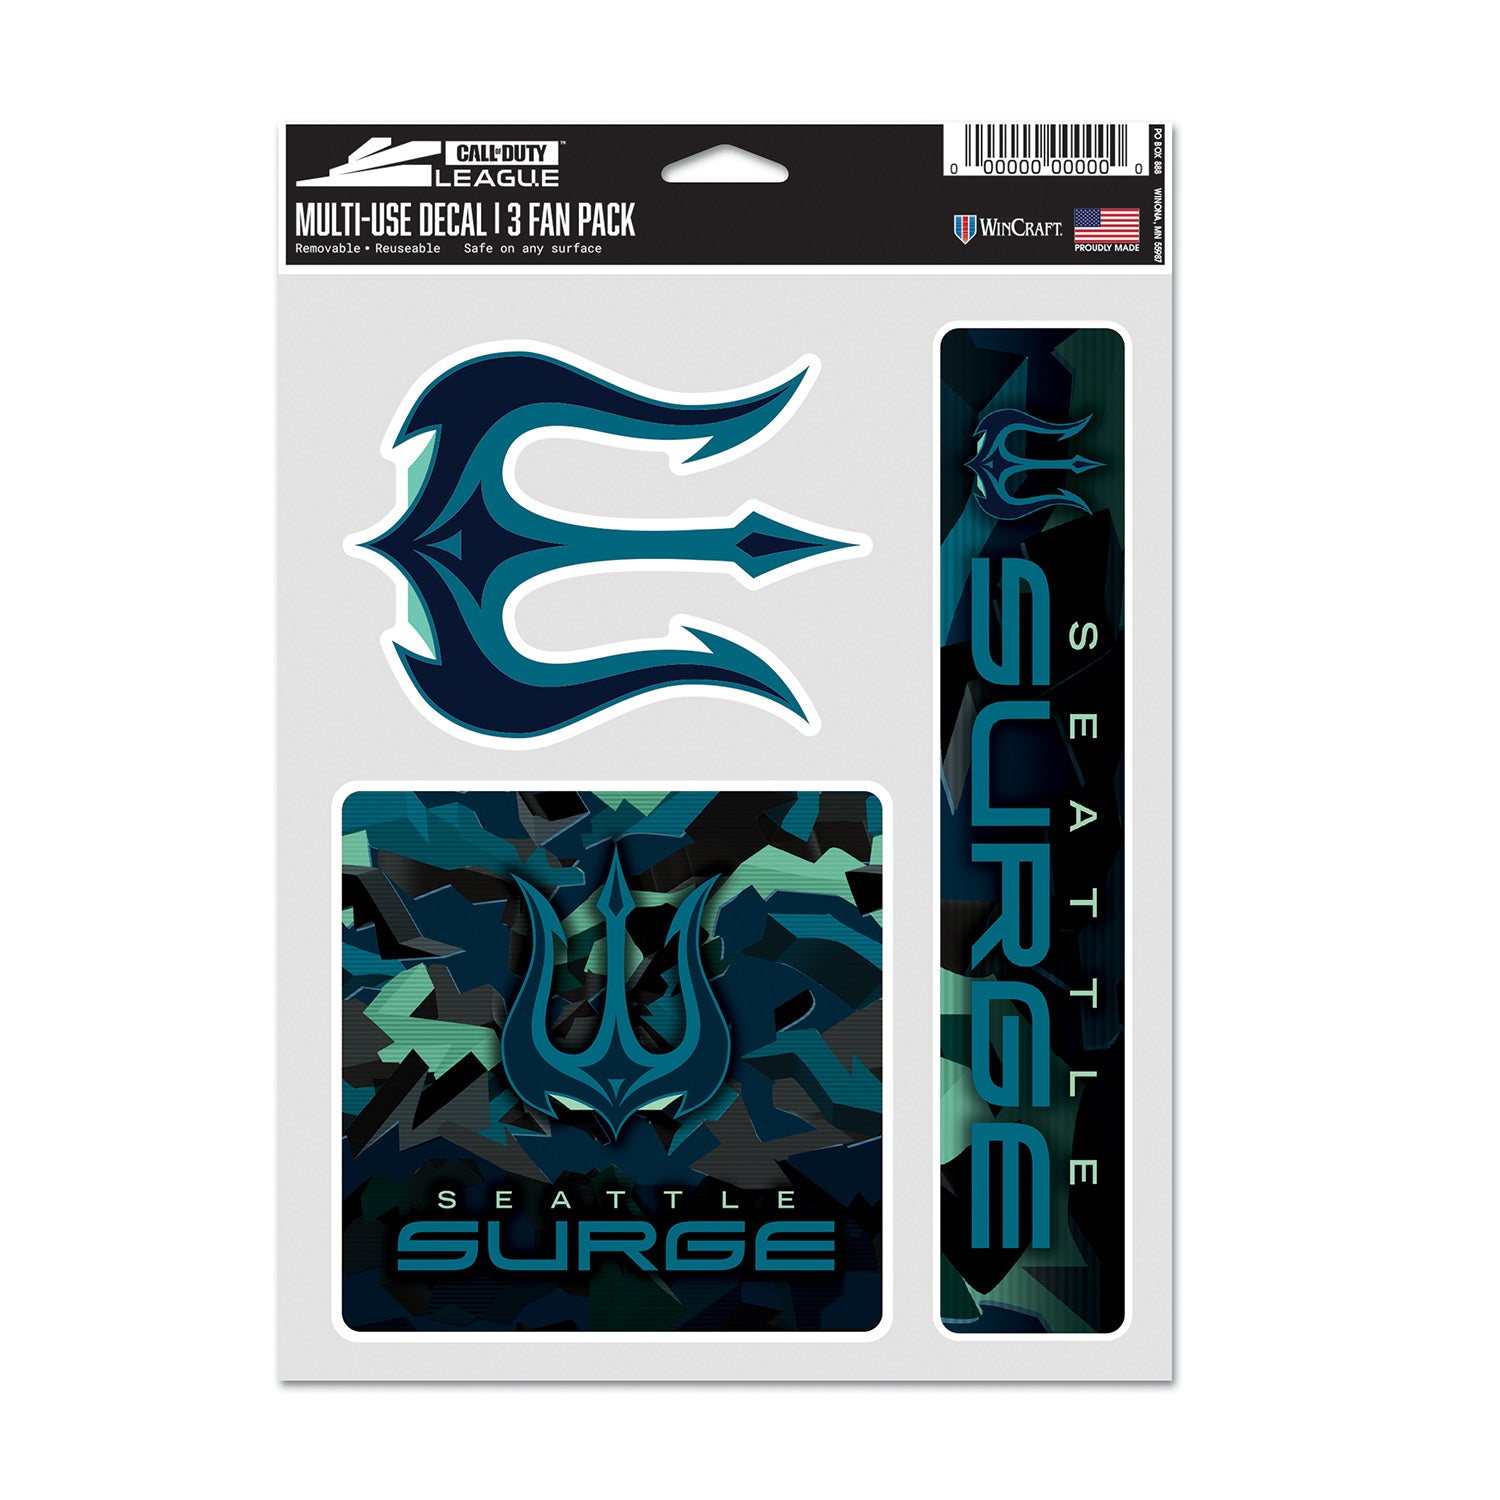 Seattle Surge Camo 3-Pack Decals